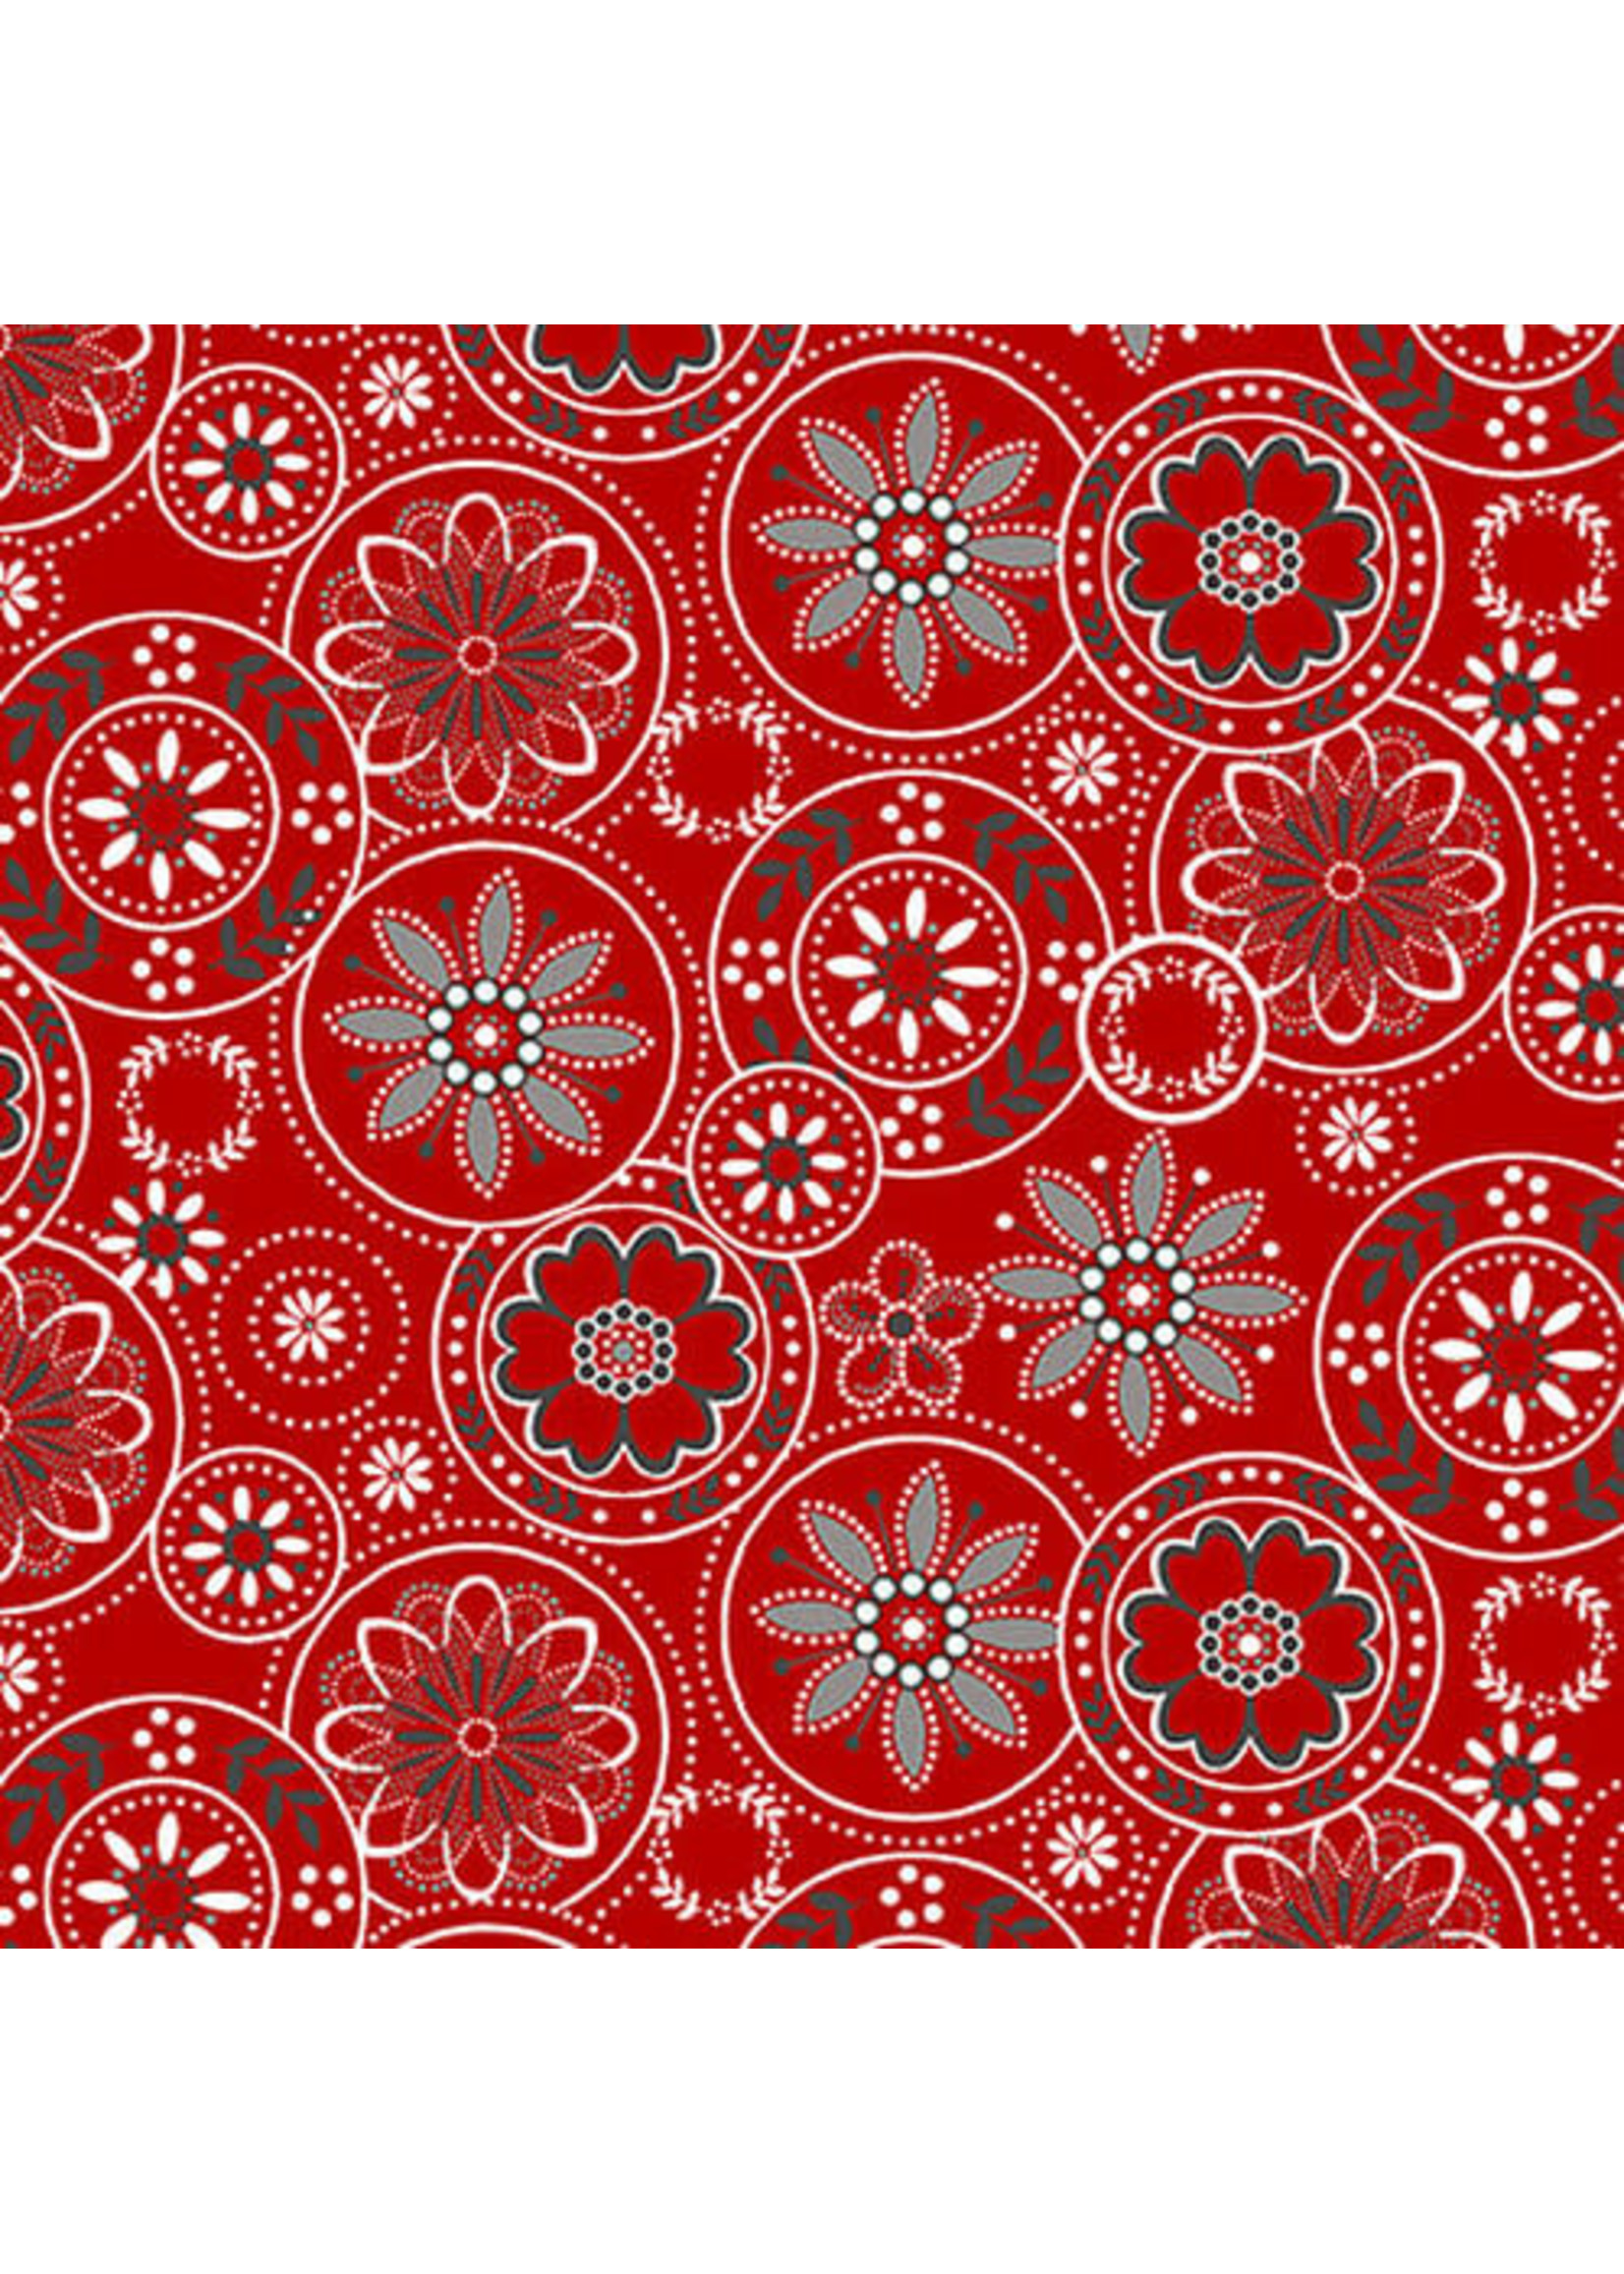 Henry Glass Fabrics Scarlet Stitches - Color Principle - Medallions - Red